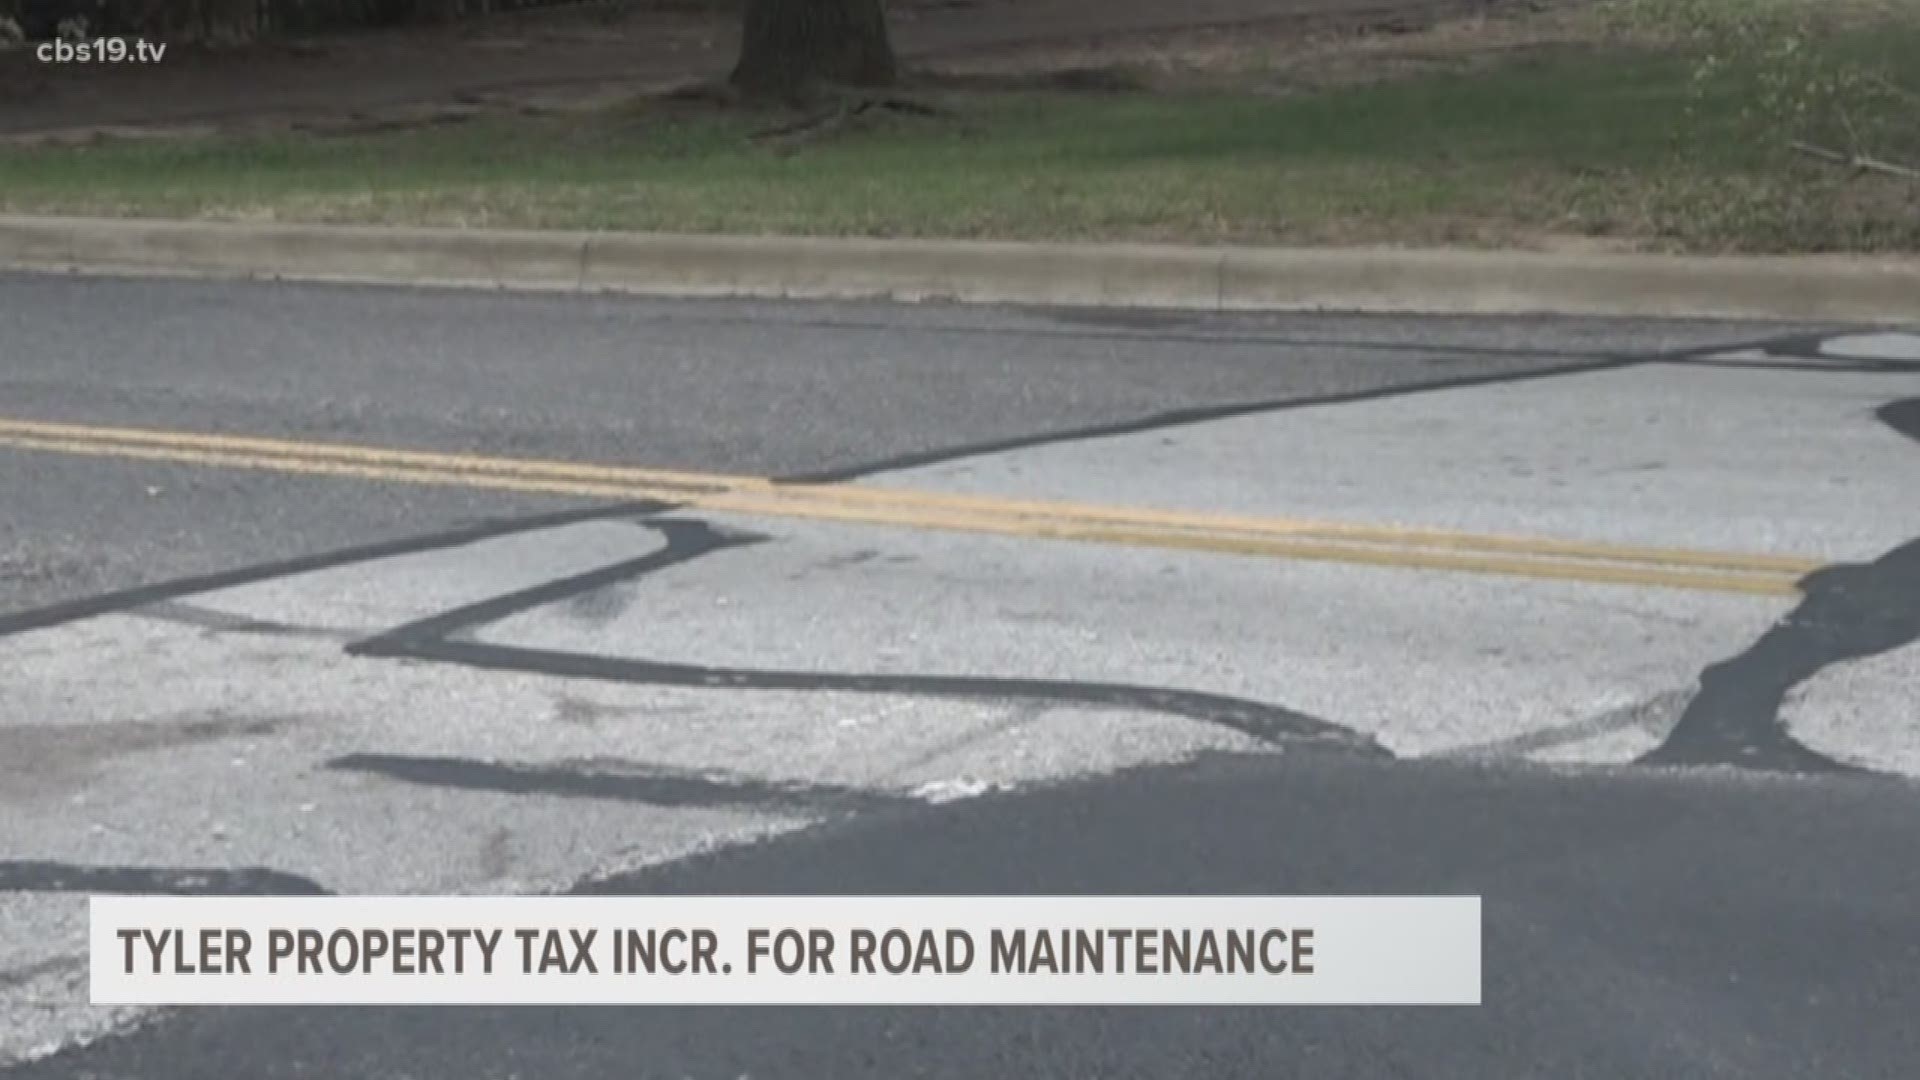 The City of Tyler's proposed property tax increase for the 2019-2020 fiscal year budget could fund street improvements for almost 79 roads.